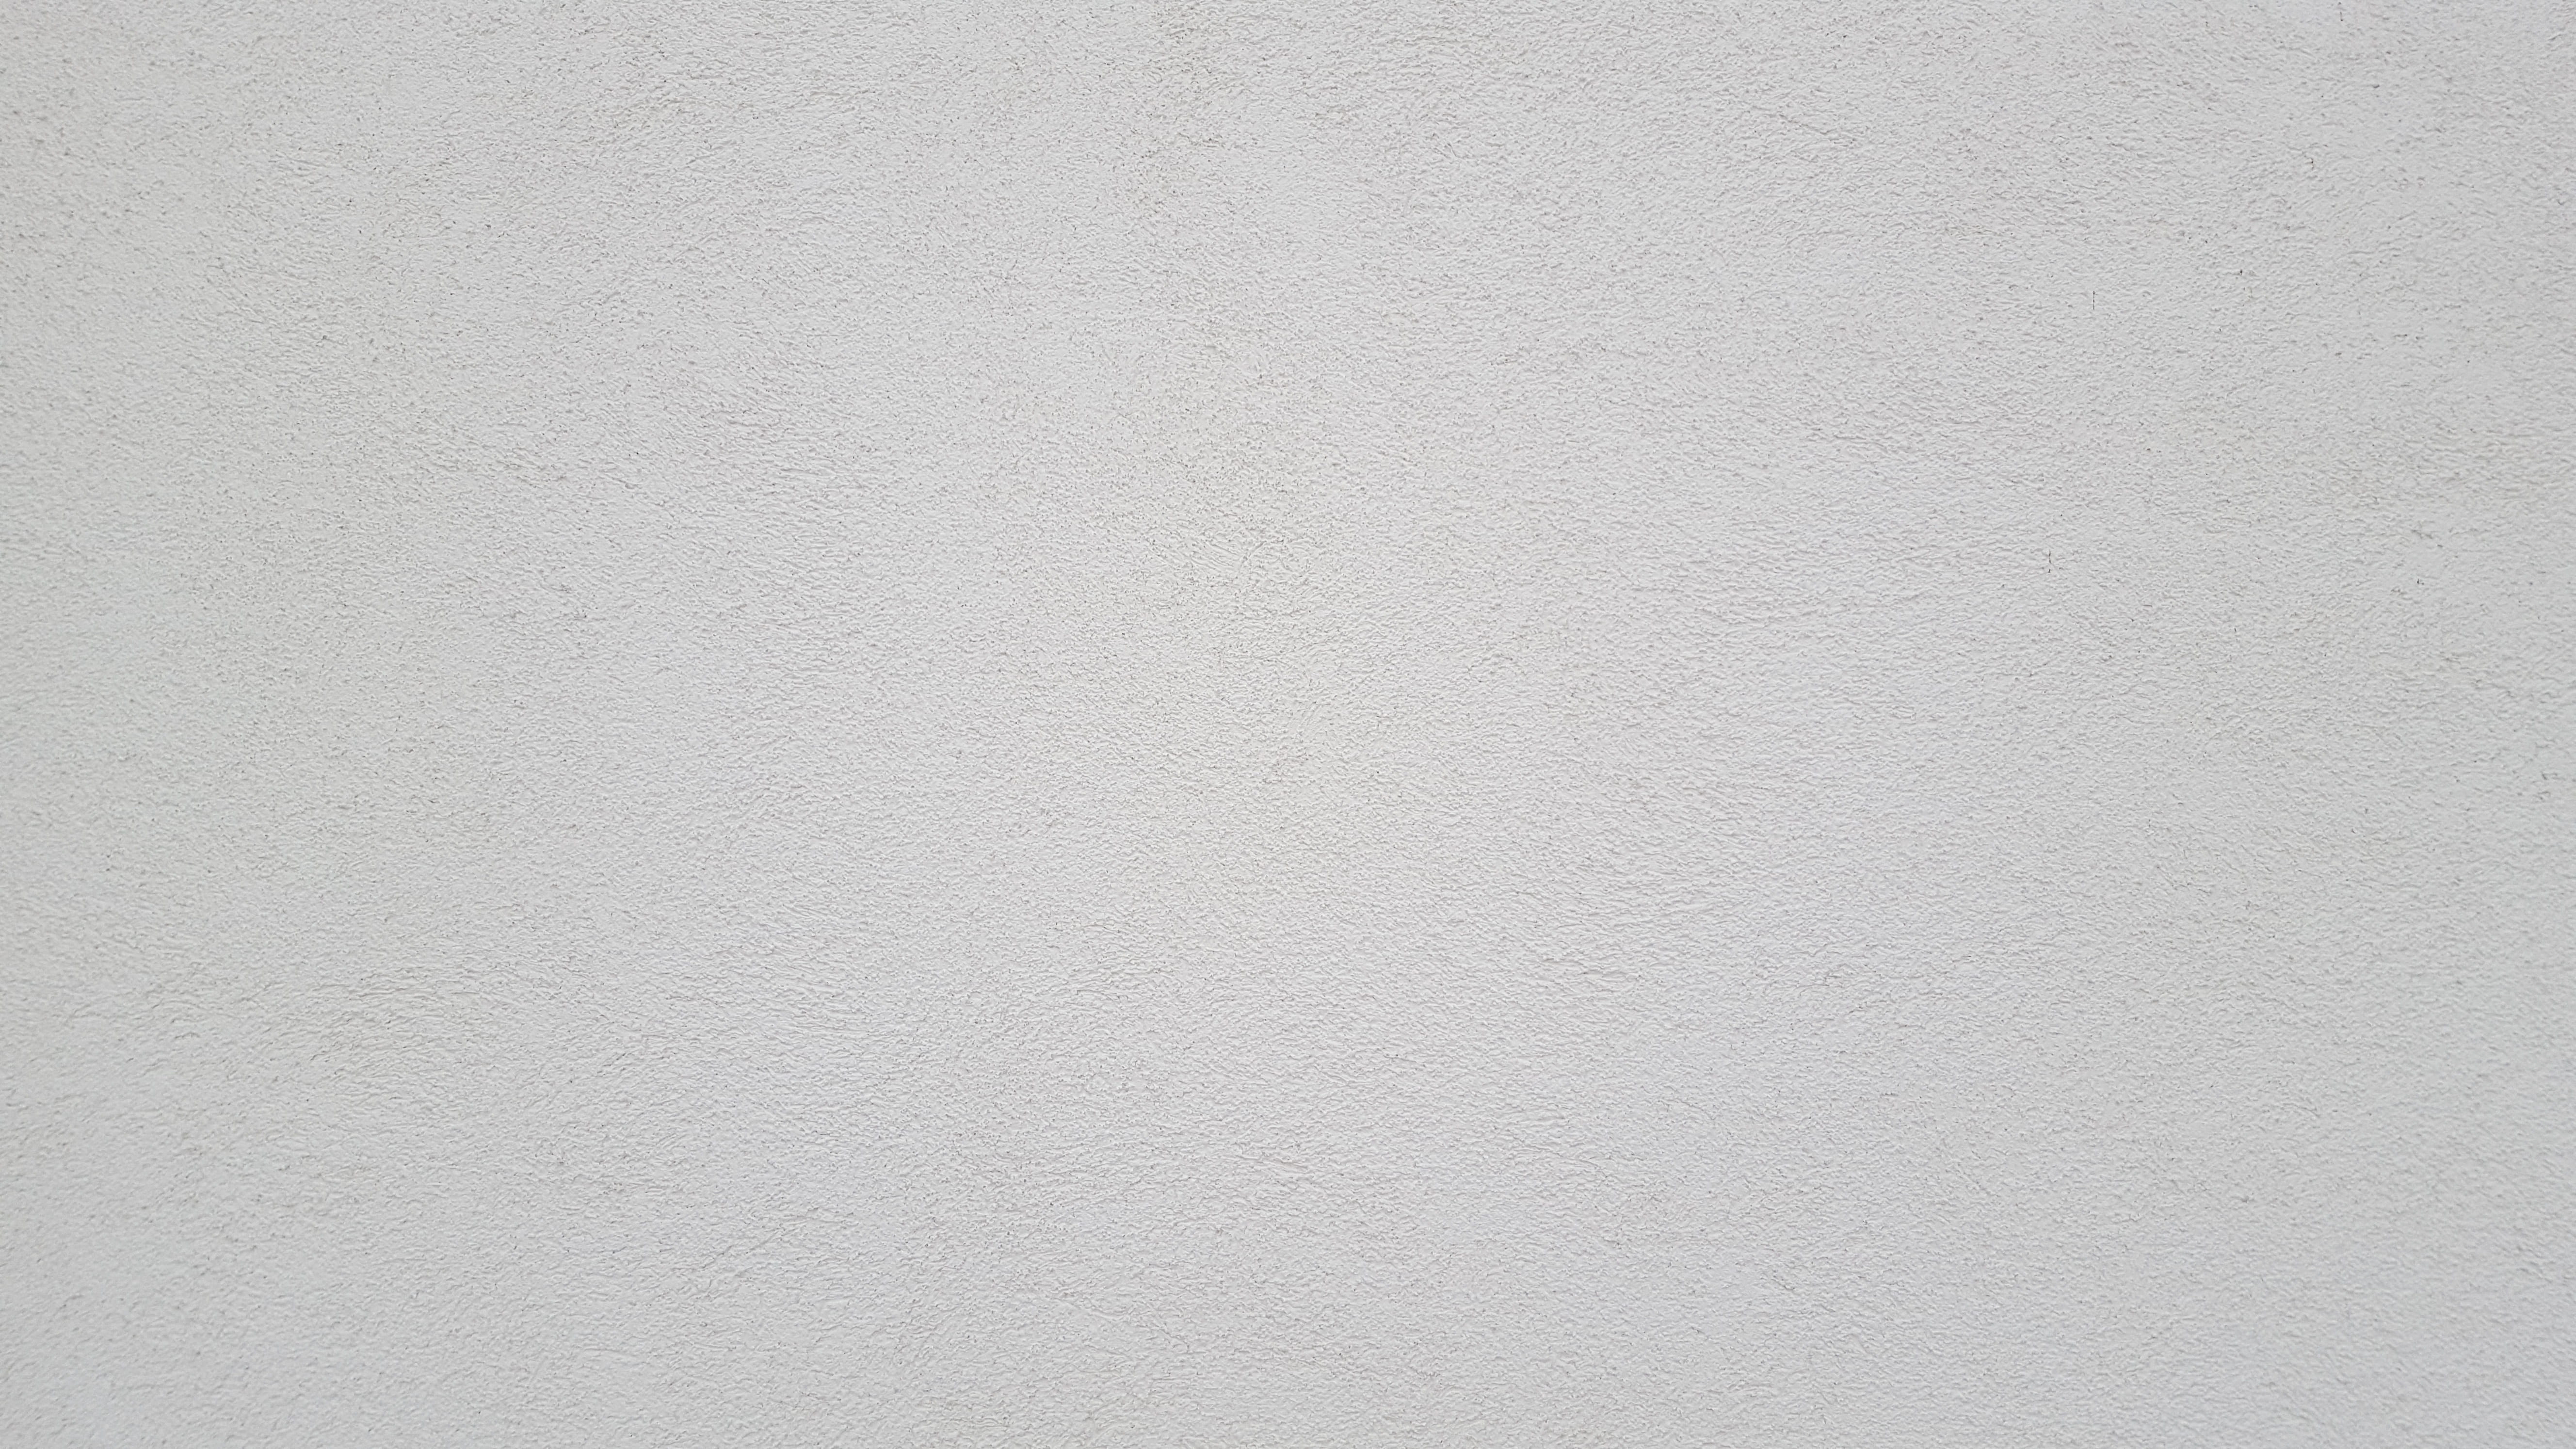 plaster, texture, white, hauswand, stone, wall, walls, backgrounds